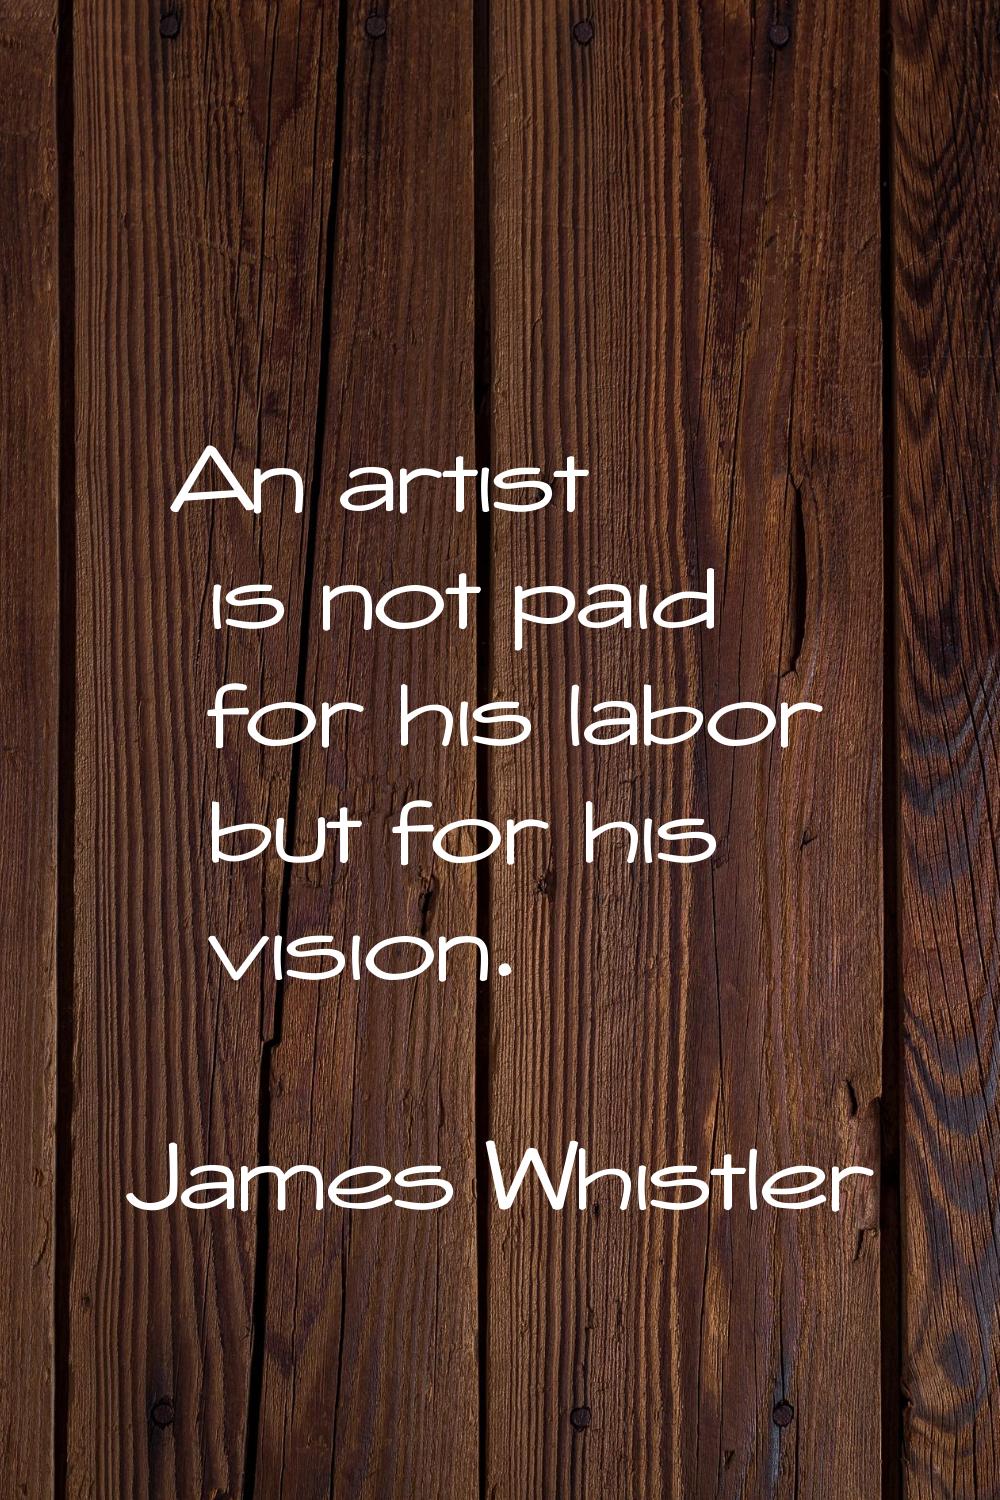 An artist is not paid for his labor but for his vision.